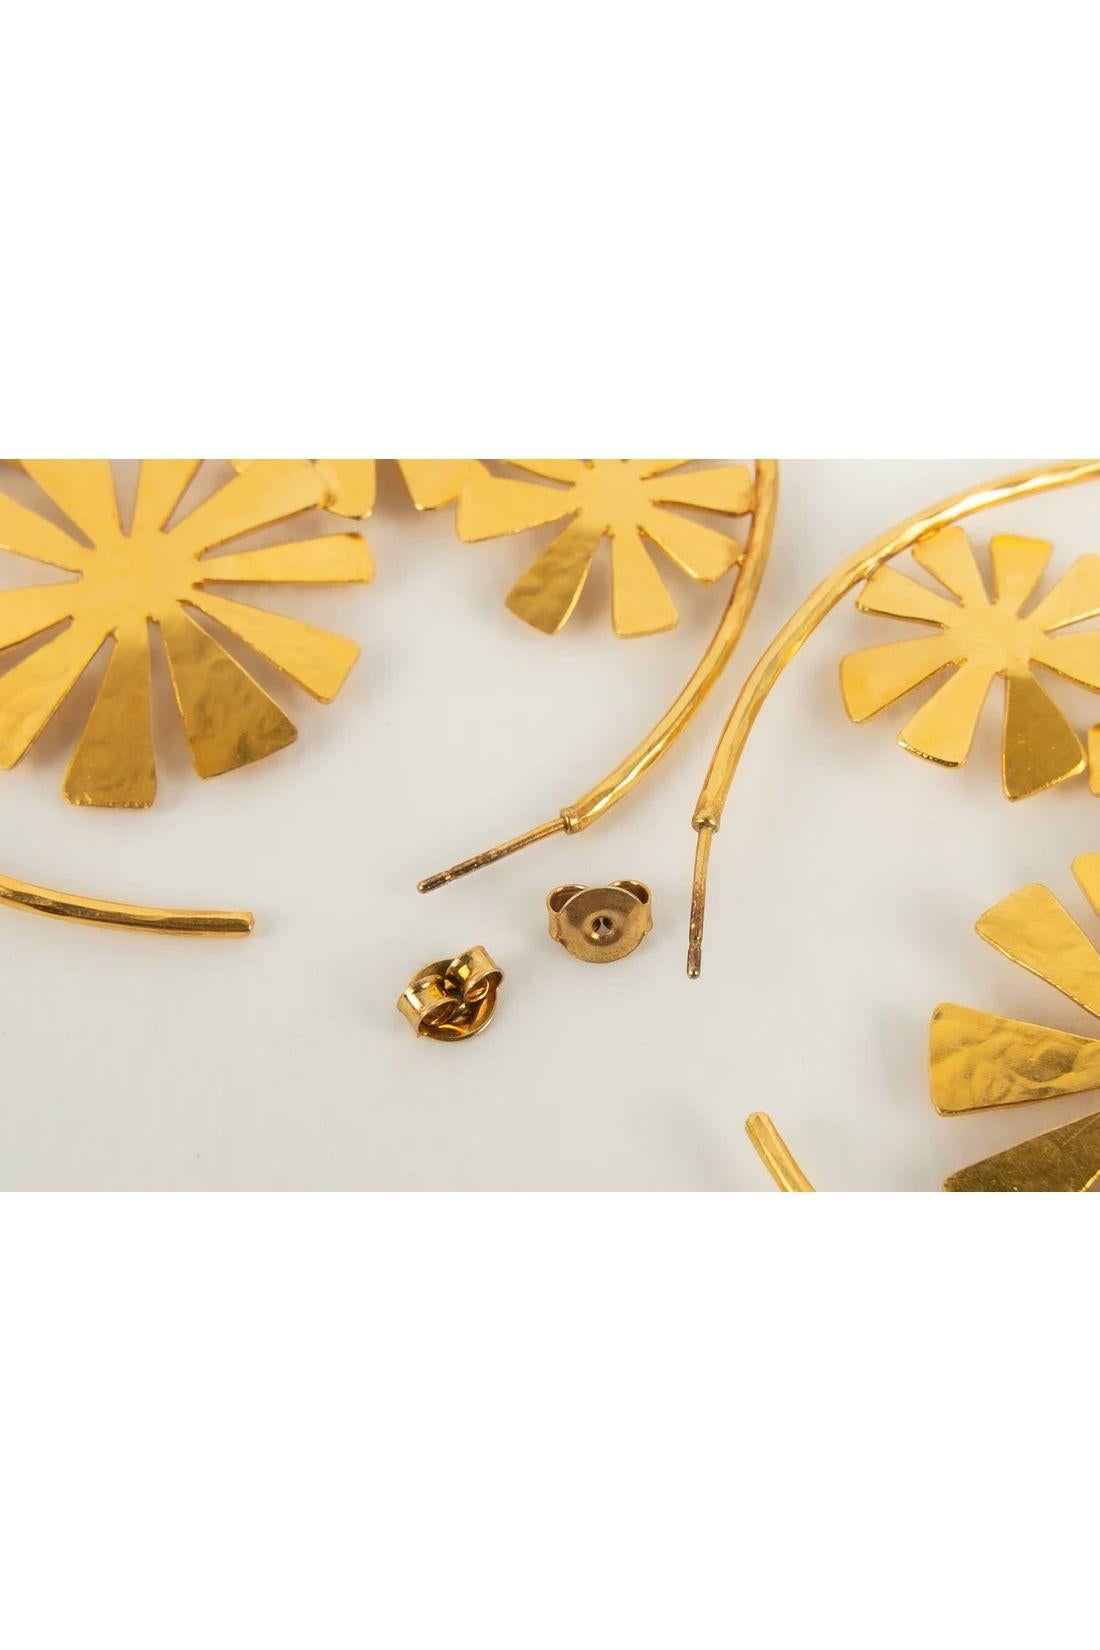 Van der Straeten Gold metal Creoles Decorated with Monogrammed Daisies Earrings In Excellent Condition For Sale In SAINT-OUEN-SUR-SEINE, FR